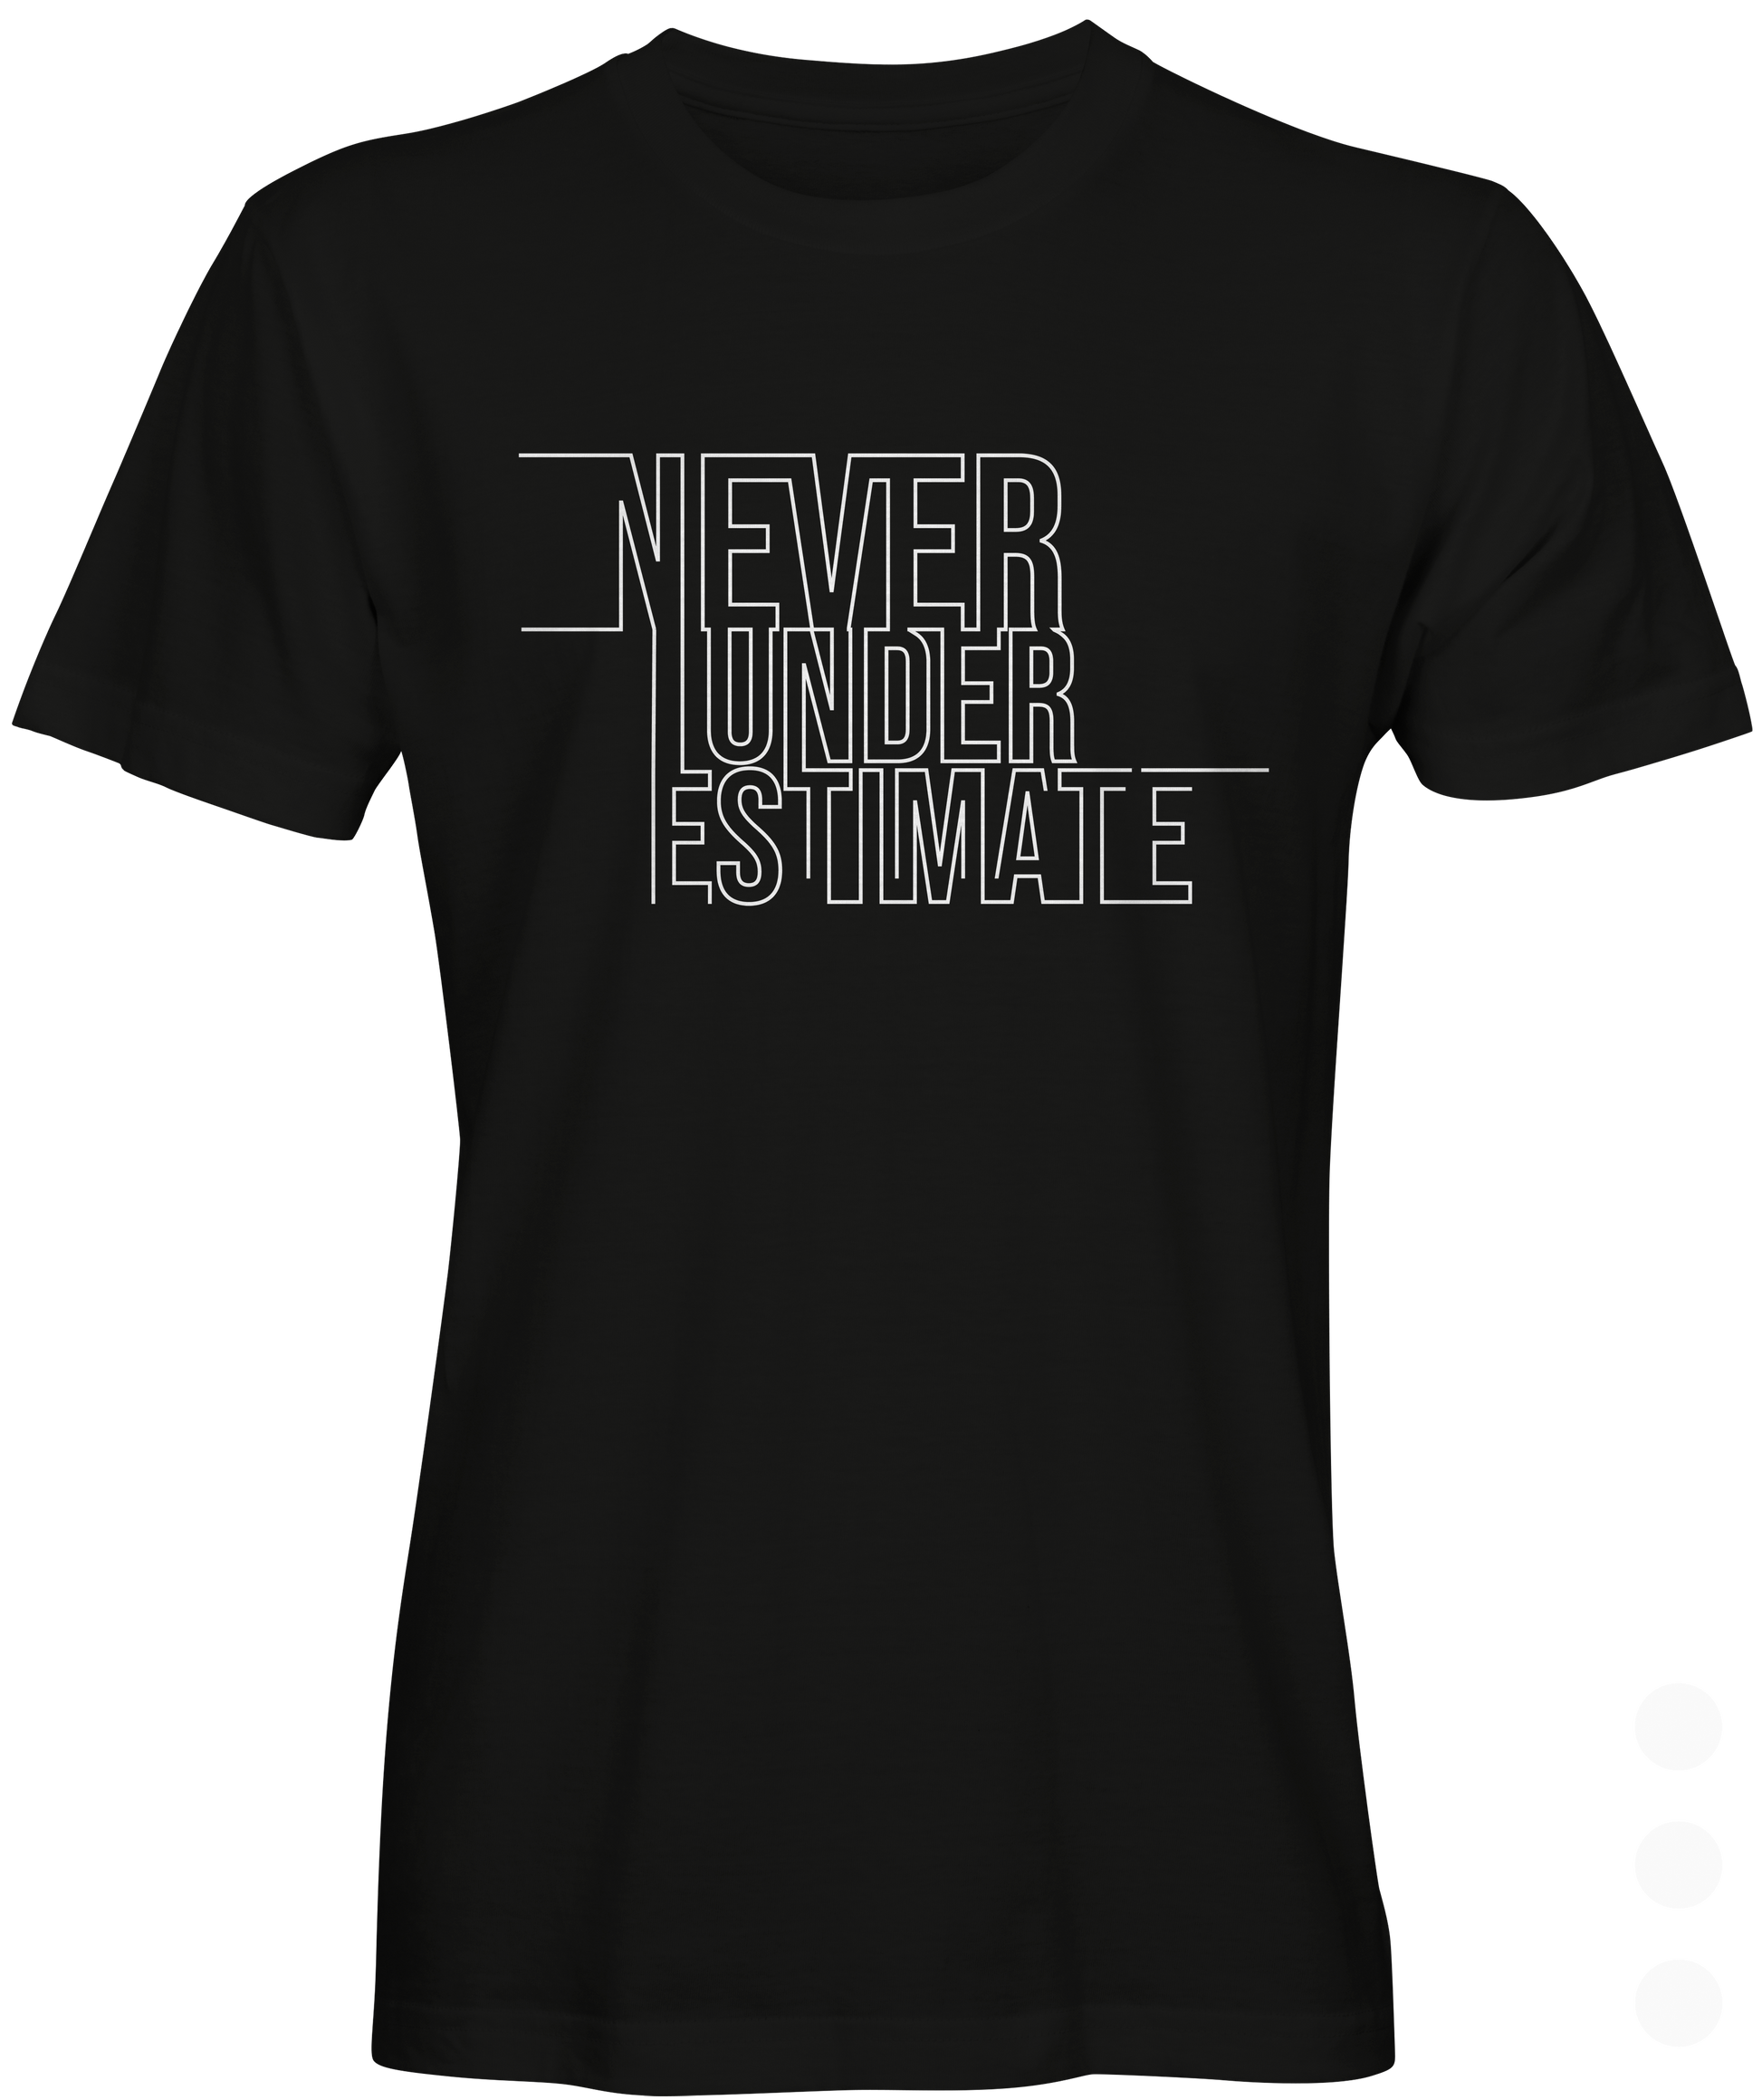 Never Underestimate Graphic T-shirt